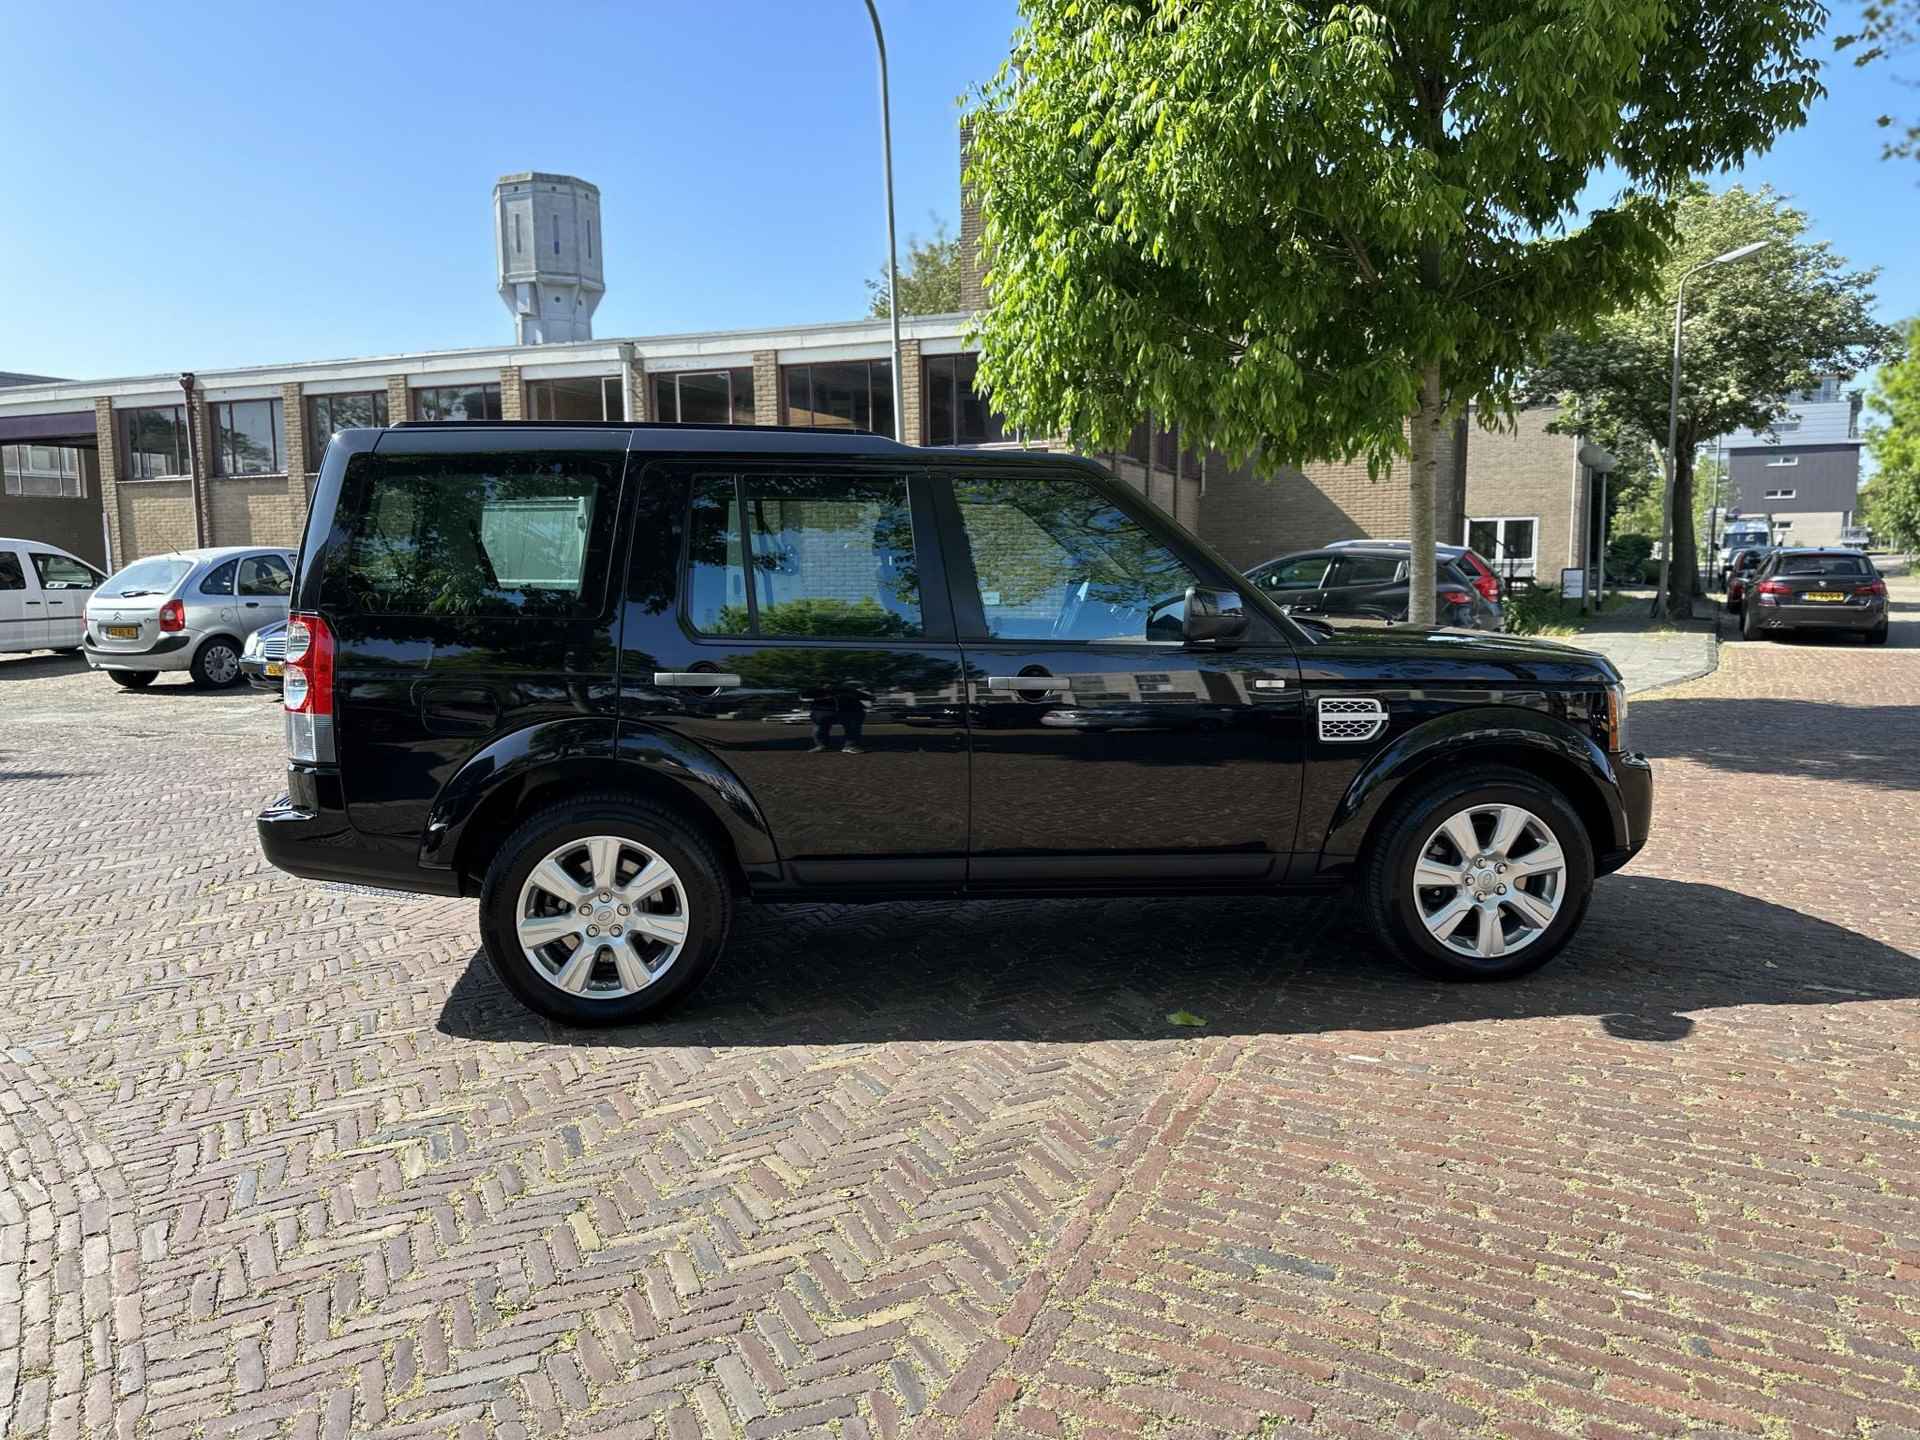 Land Rover Discovery 5.0 V8 HSE 5.0 Hse - 10/16